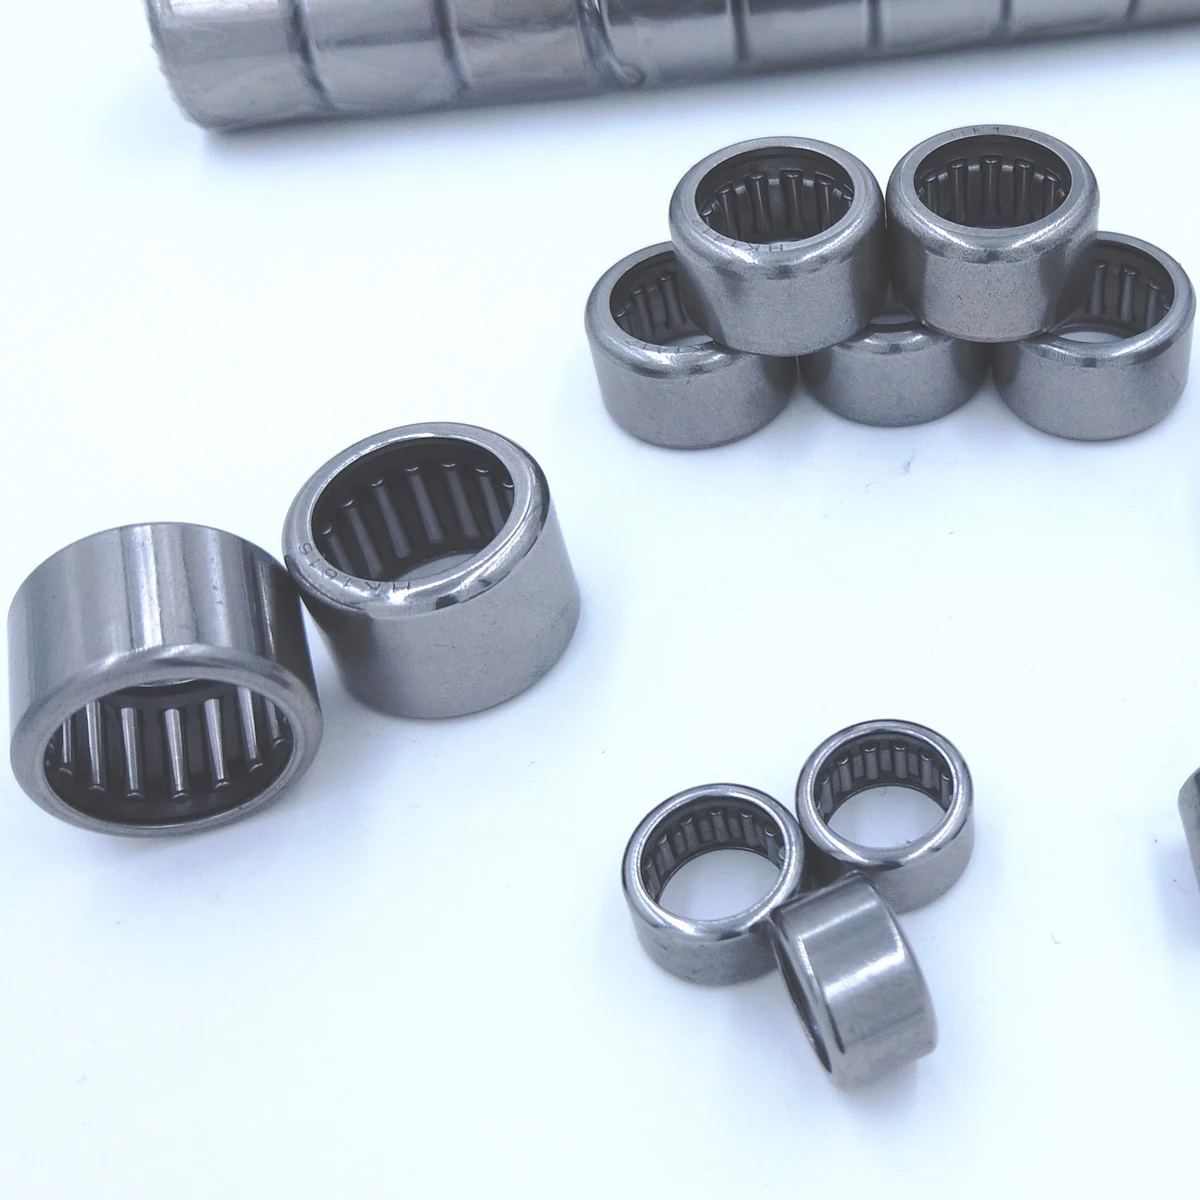 

1Pc HK101612 10 x 16 x 12 mm Drawn Cup Type Needle Roller Bearing * sturdy packaging reliable quality Cost-effective